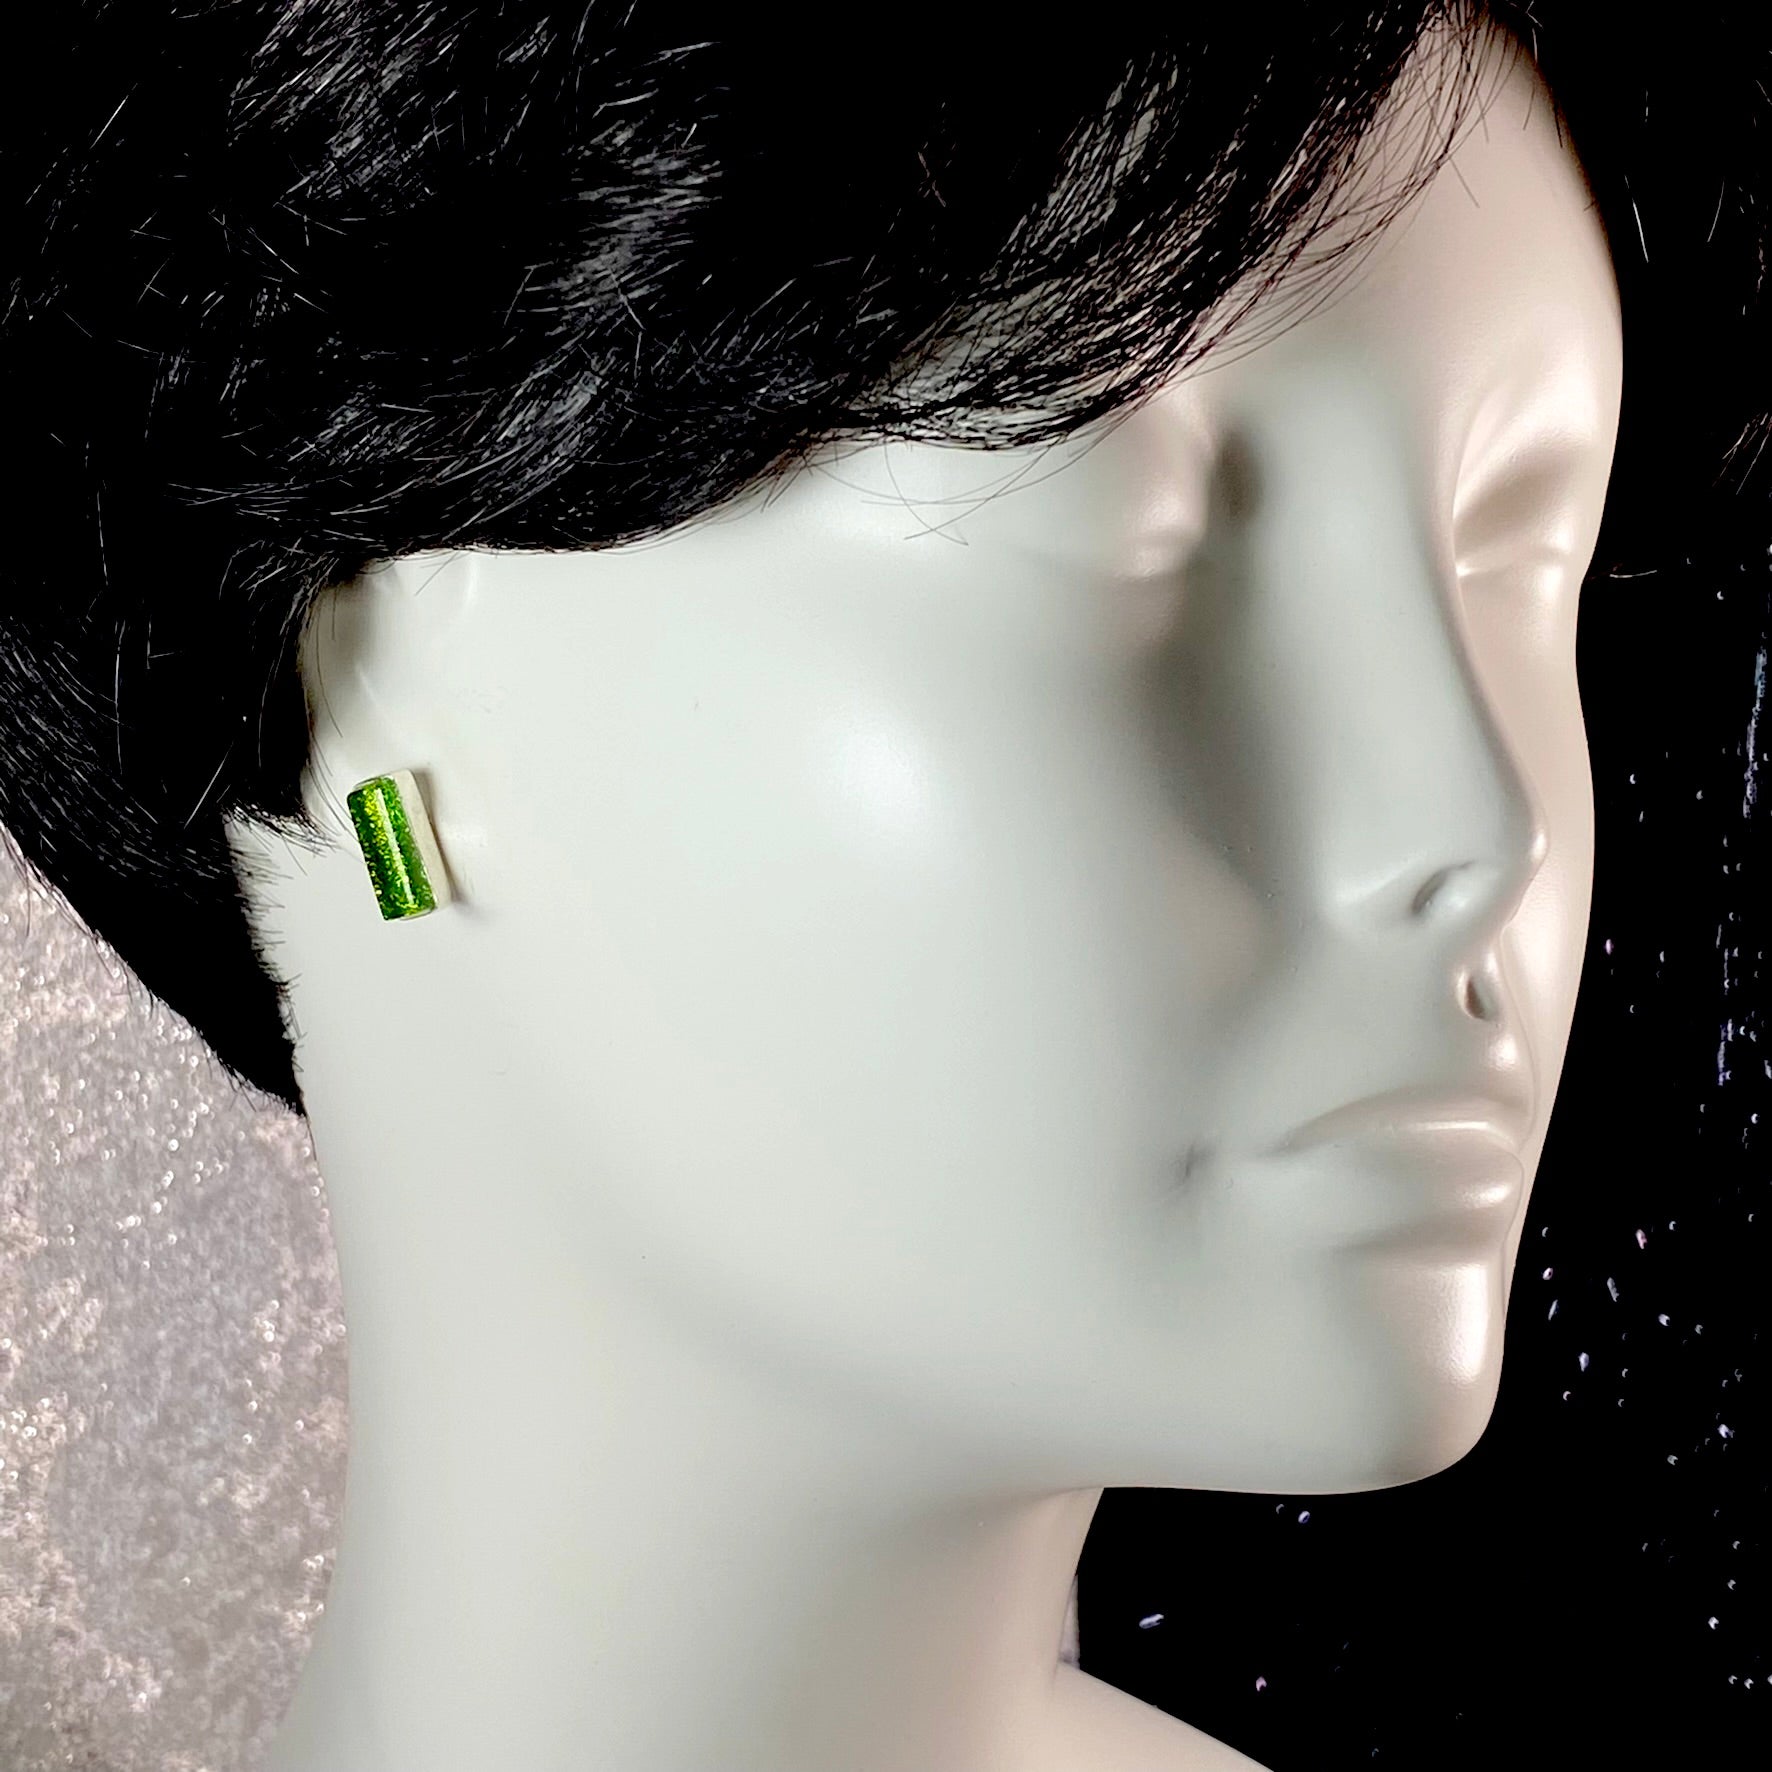 green rectangle post earrings, fused glass, glass jewelry, glass and silver jewelry, handmade, handcrafted, American Craft, hand fabricated jewelry, hand fabricated jewellery, Athen, Georgia, colorful jewelry, sparkle, bullseye glass, dichroic glass, art jewelry